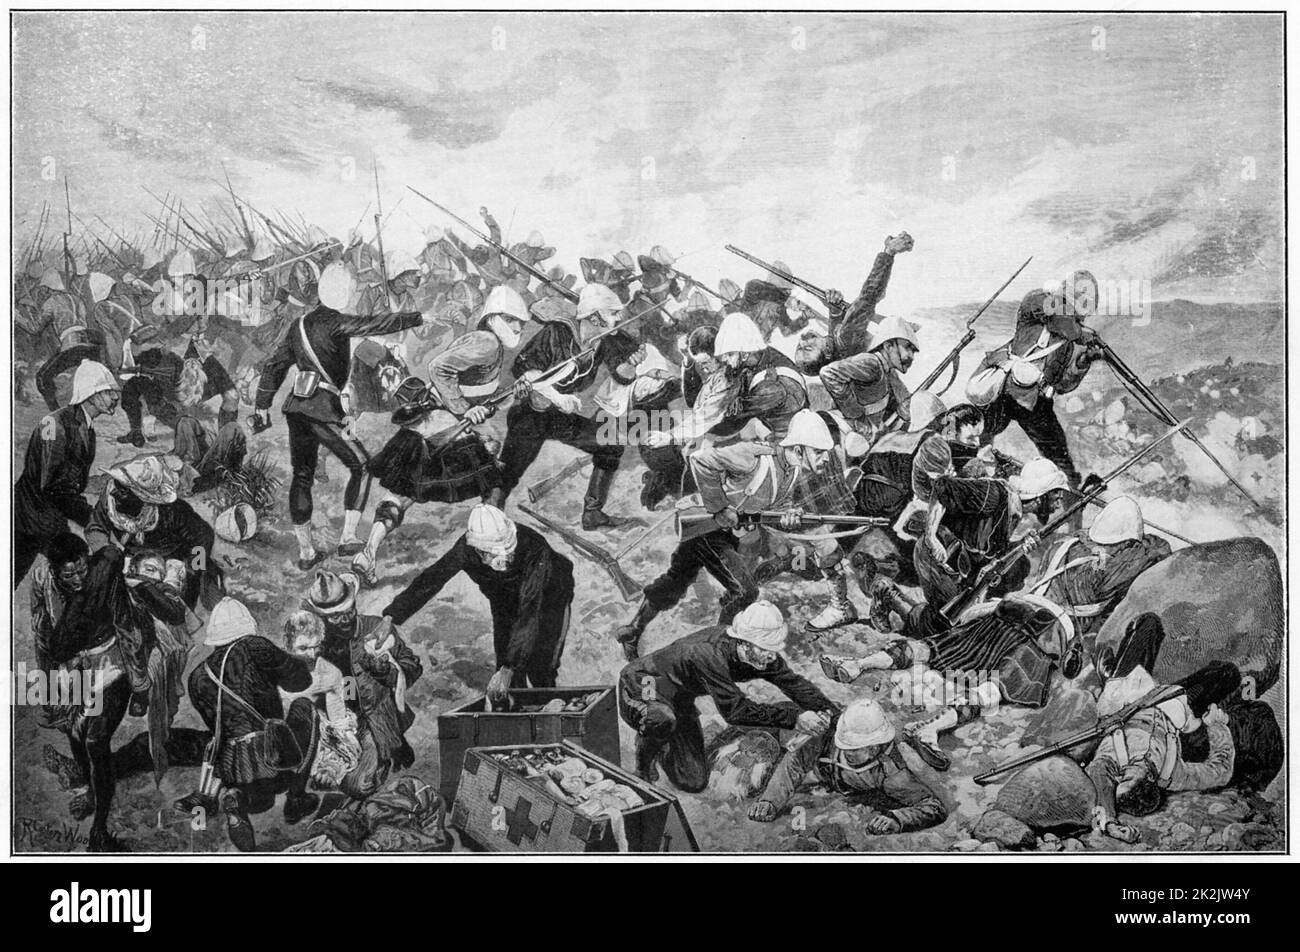 Battle of Majuba Hill, 27 February 1881, lst Boer War. British under General Colley, routed by the Boers. After drawing by R. Caton Woodville based on notes by eyewitnesses. Stock Photo